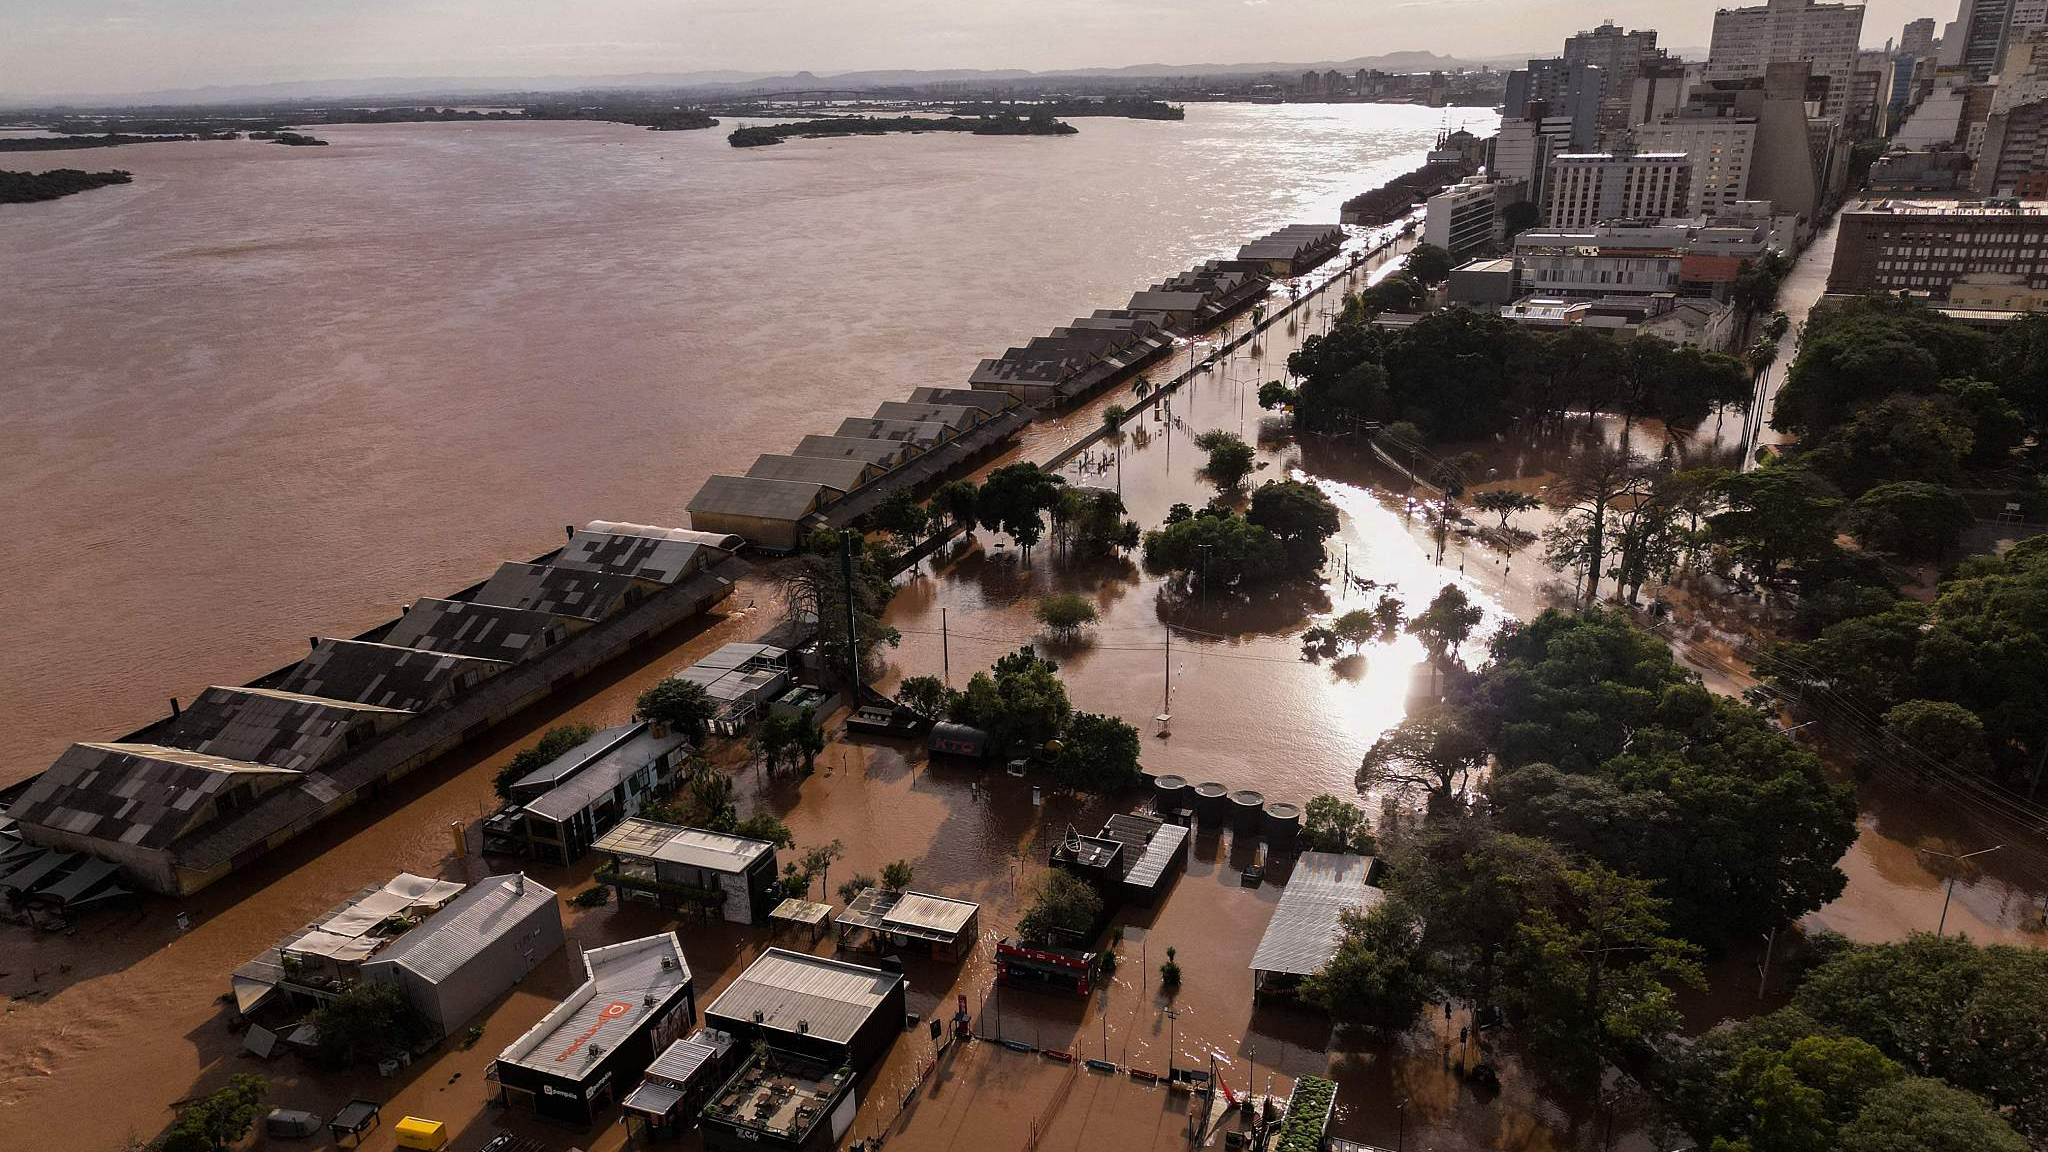 Brazil floods: 100 lives lost, rescues interrupted by heavy rain